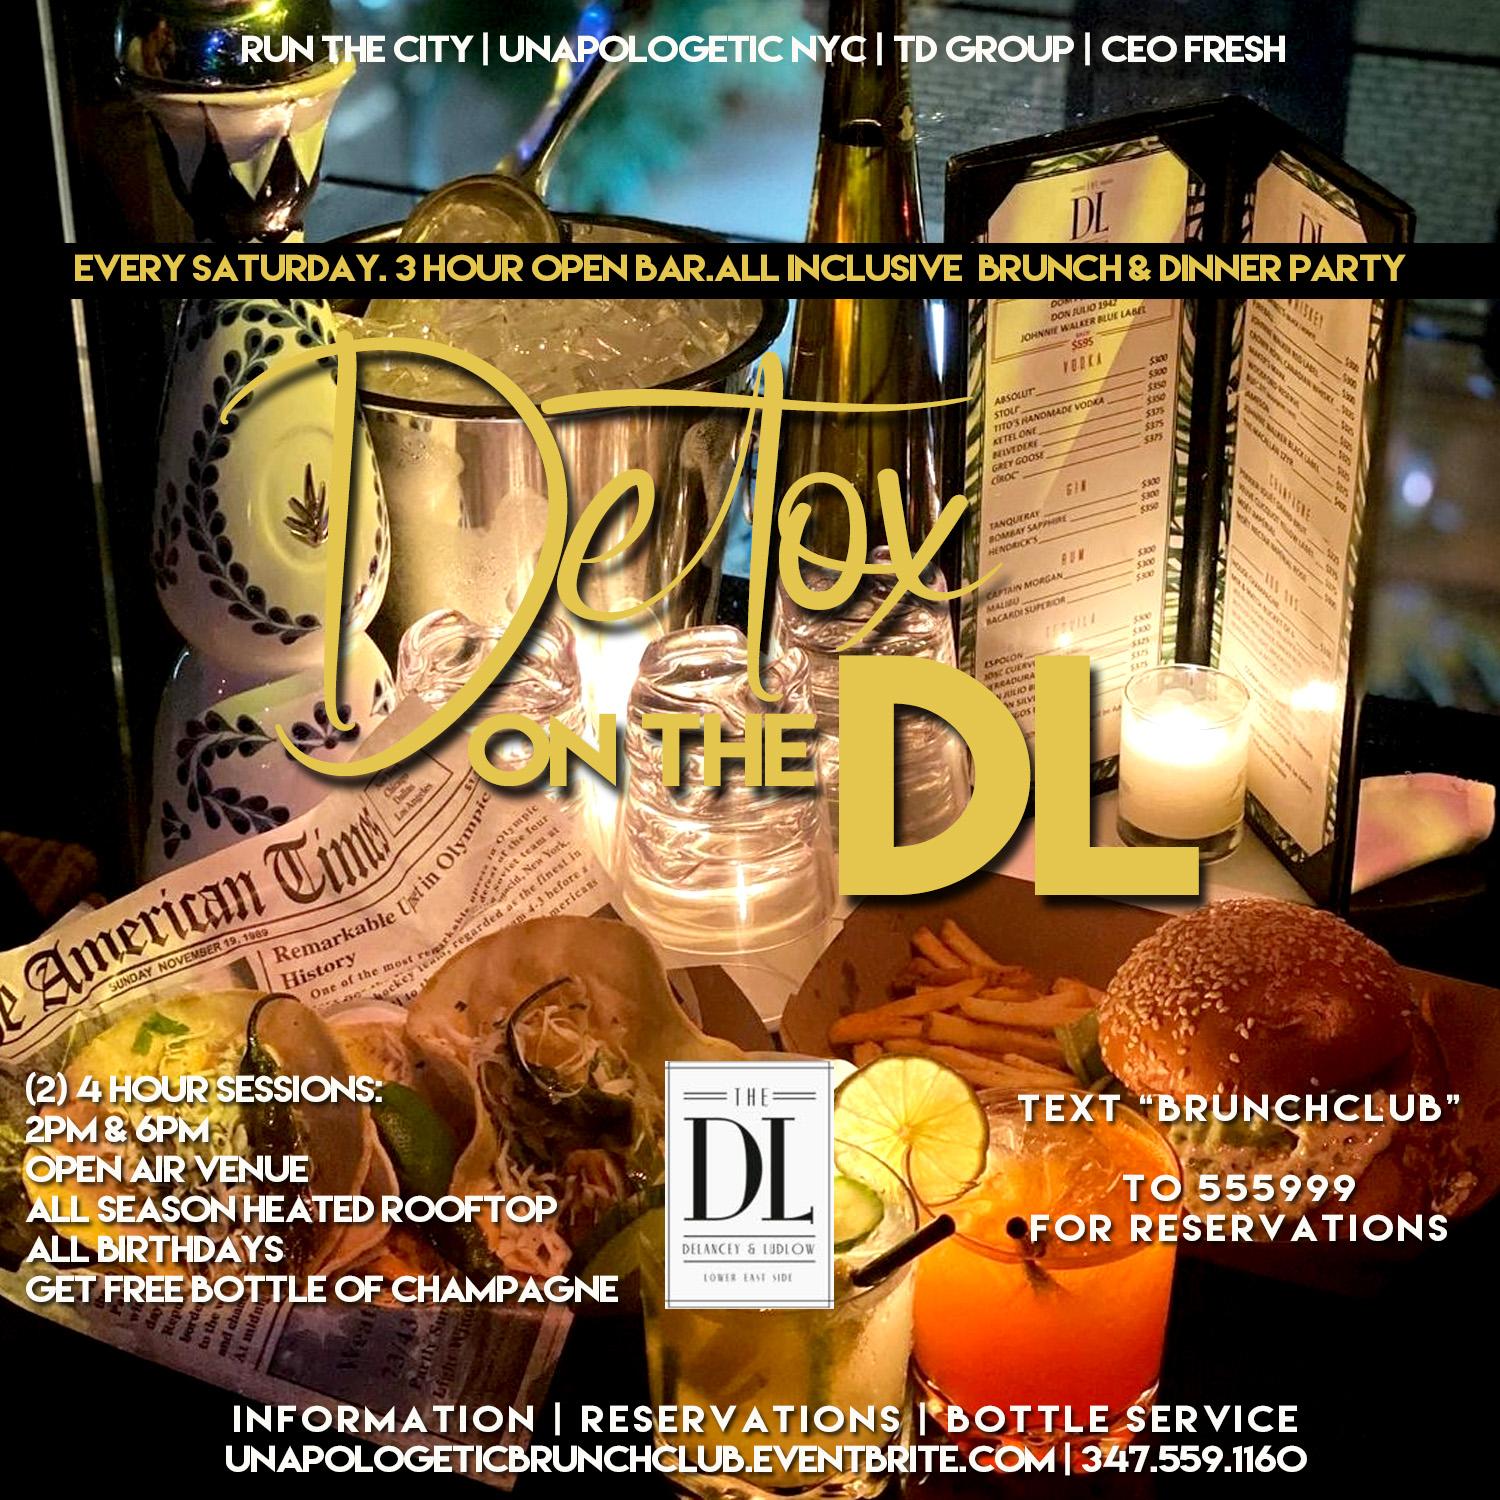 1/23 DETOX SATURDAY ROOFTOP BRUNCH & DINNER PARTY @ THE DL